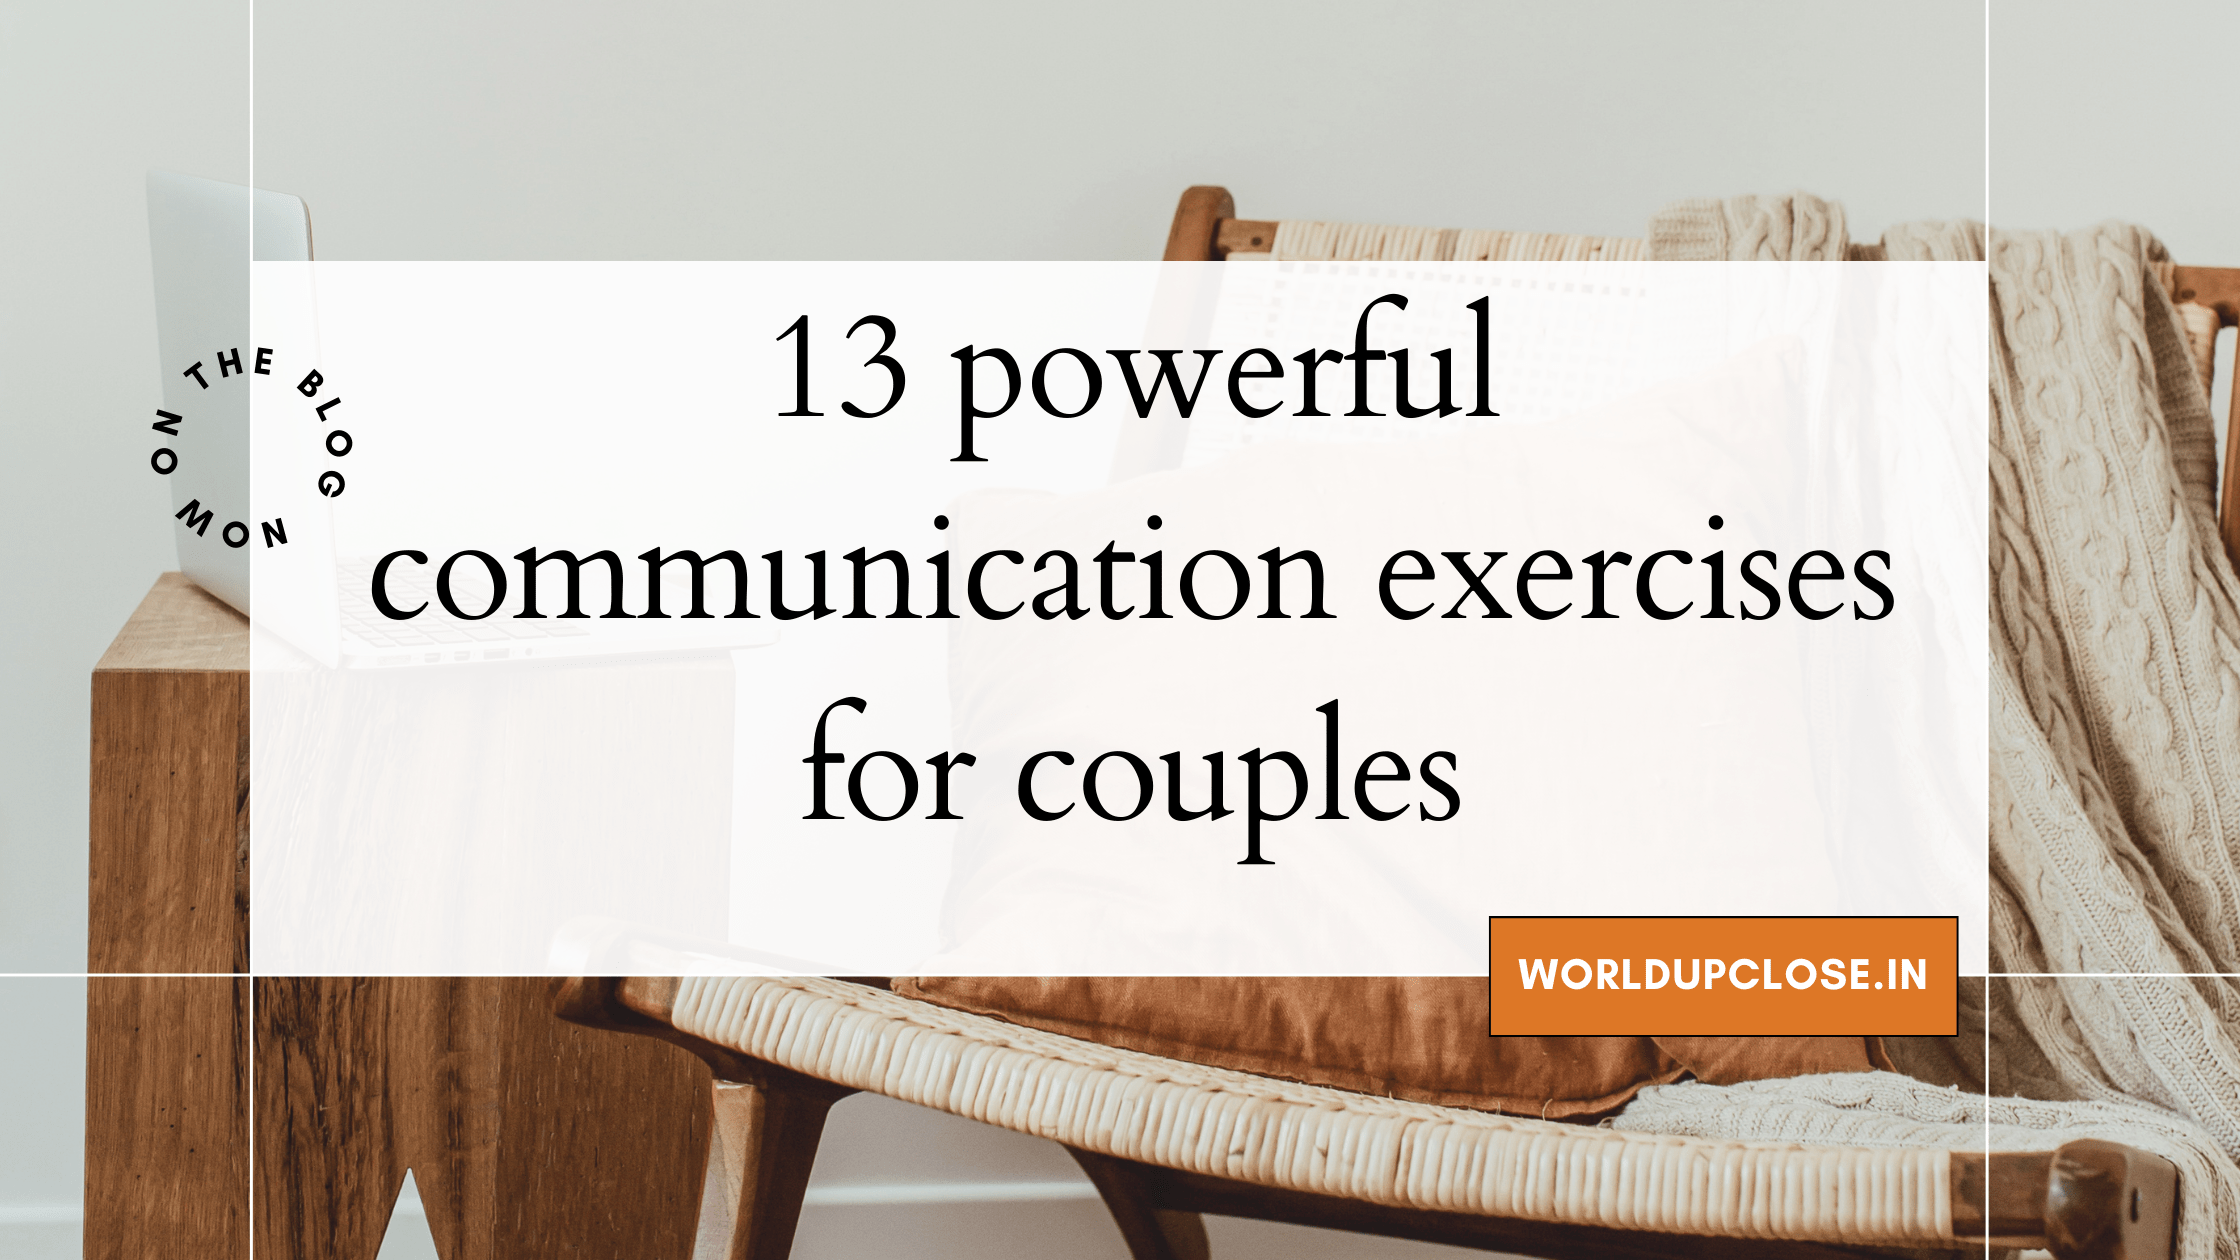 13 powerful communication exercises for couples 14